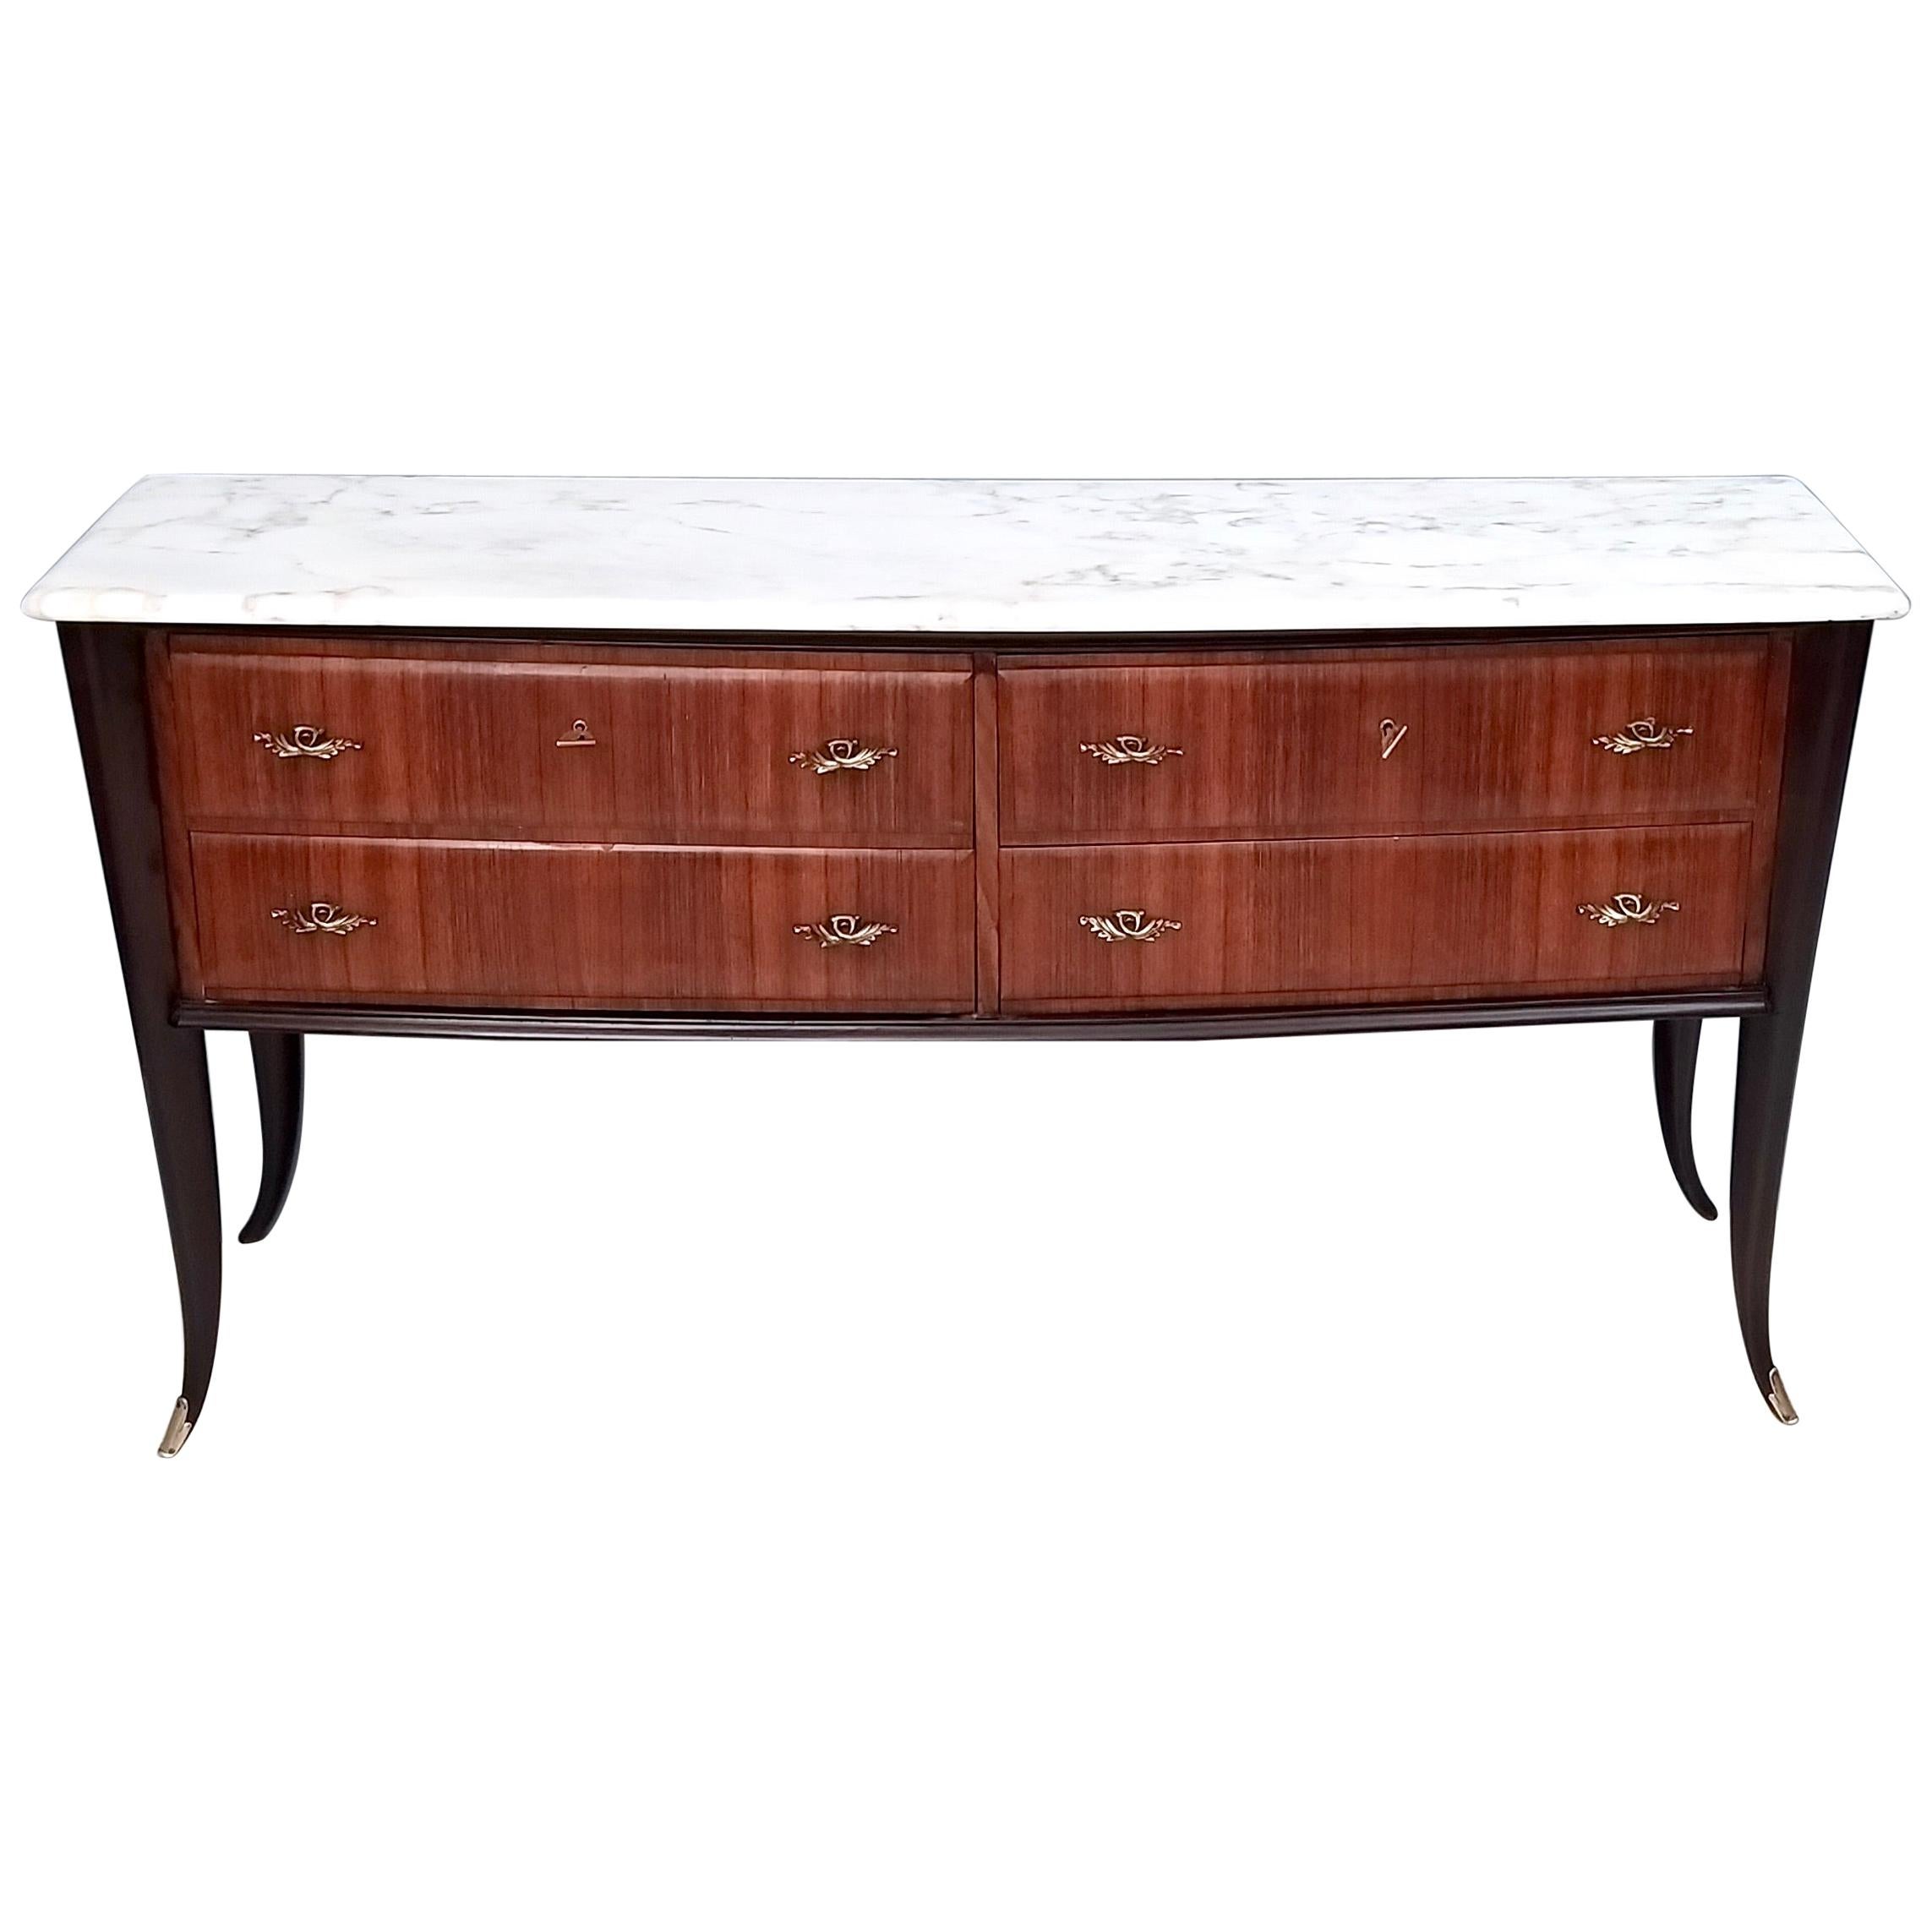 Vintage Black Walnut Dresser Produced by Dassi with Carrara Marble Top, Italy